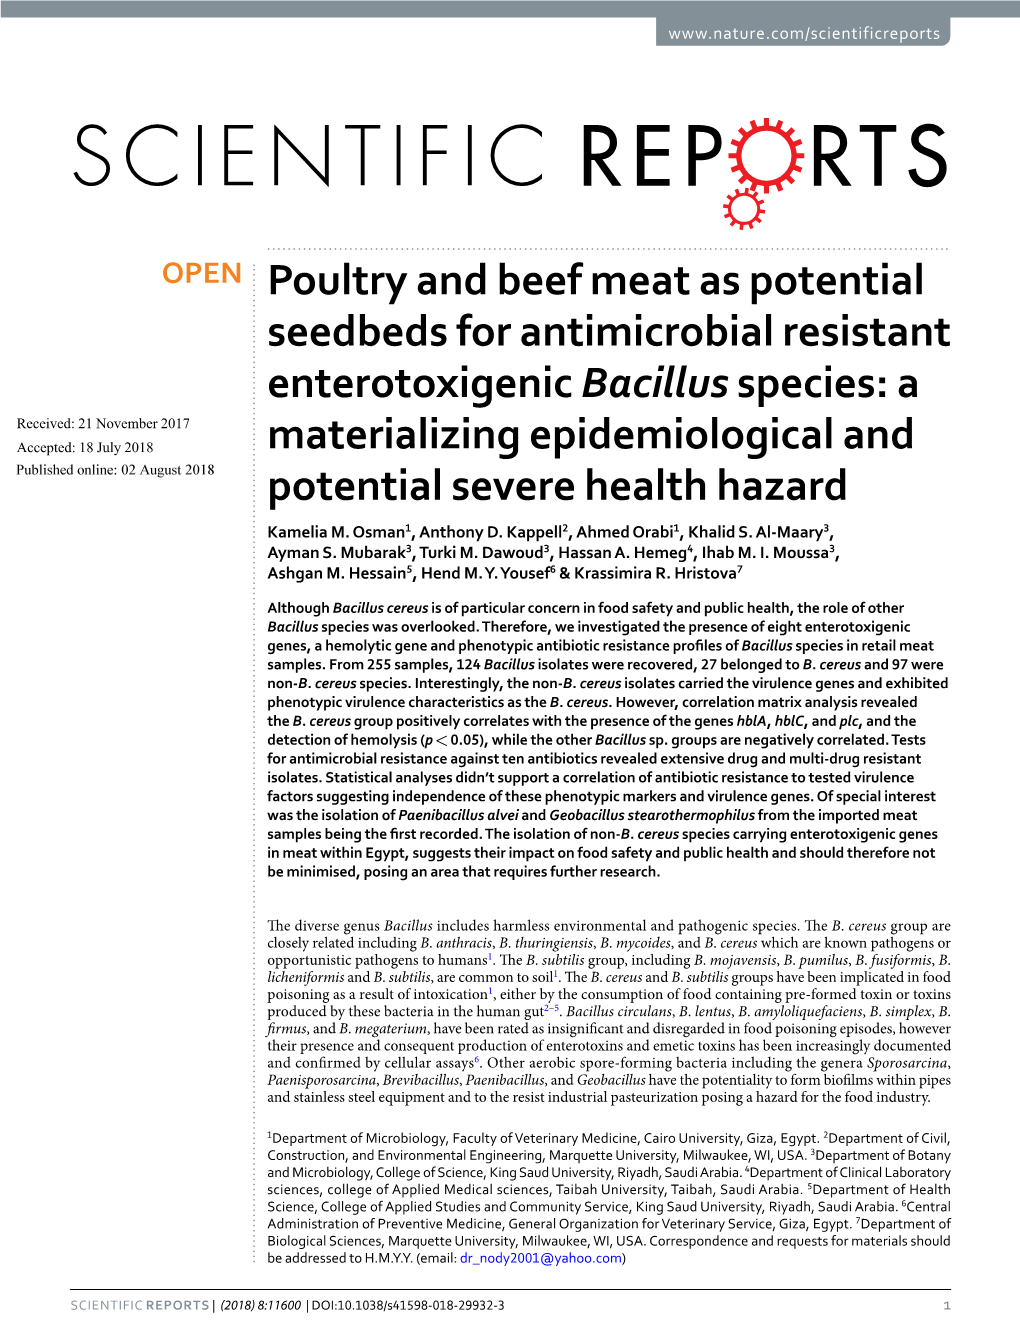 Poultry and Beef Meat As Potential Seedbeds for Antimicrobial Resistant